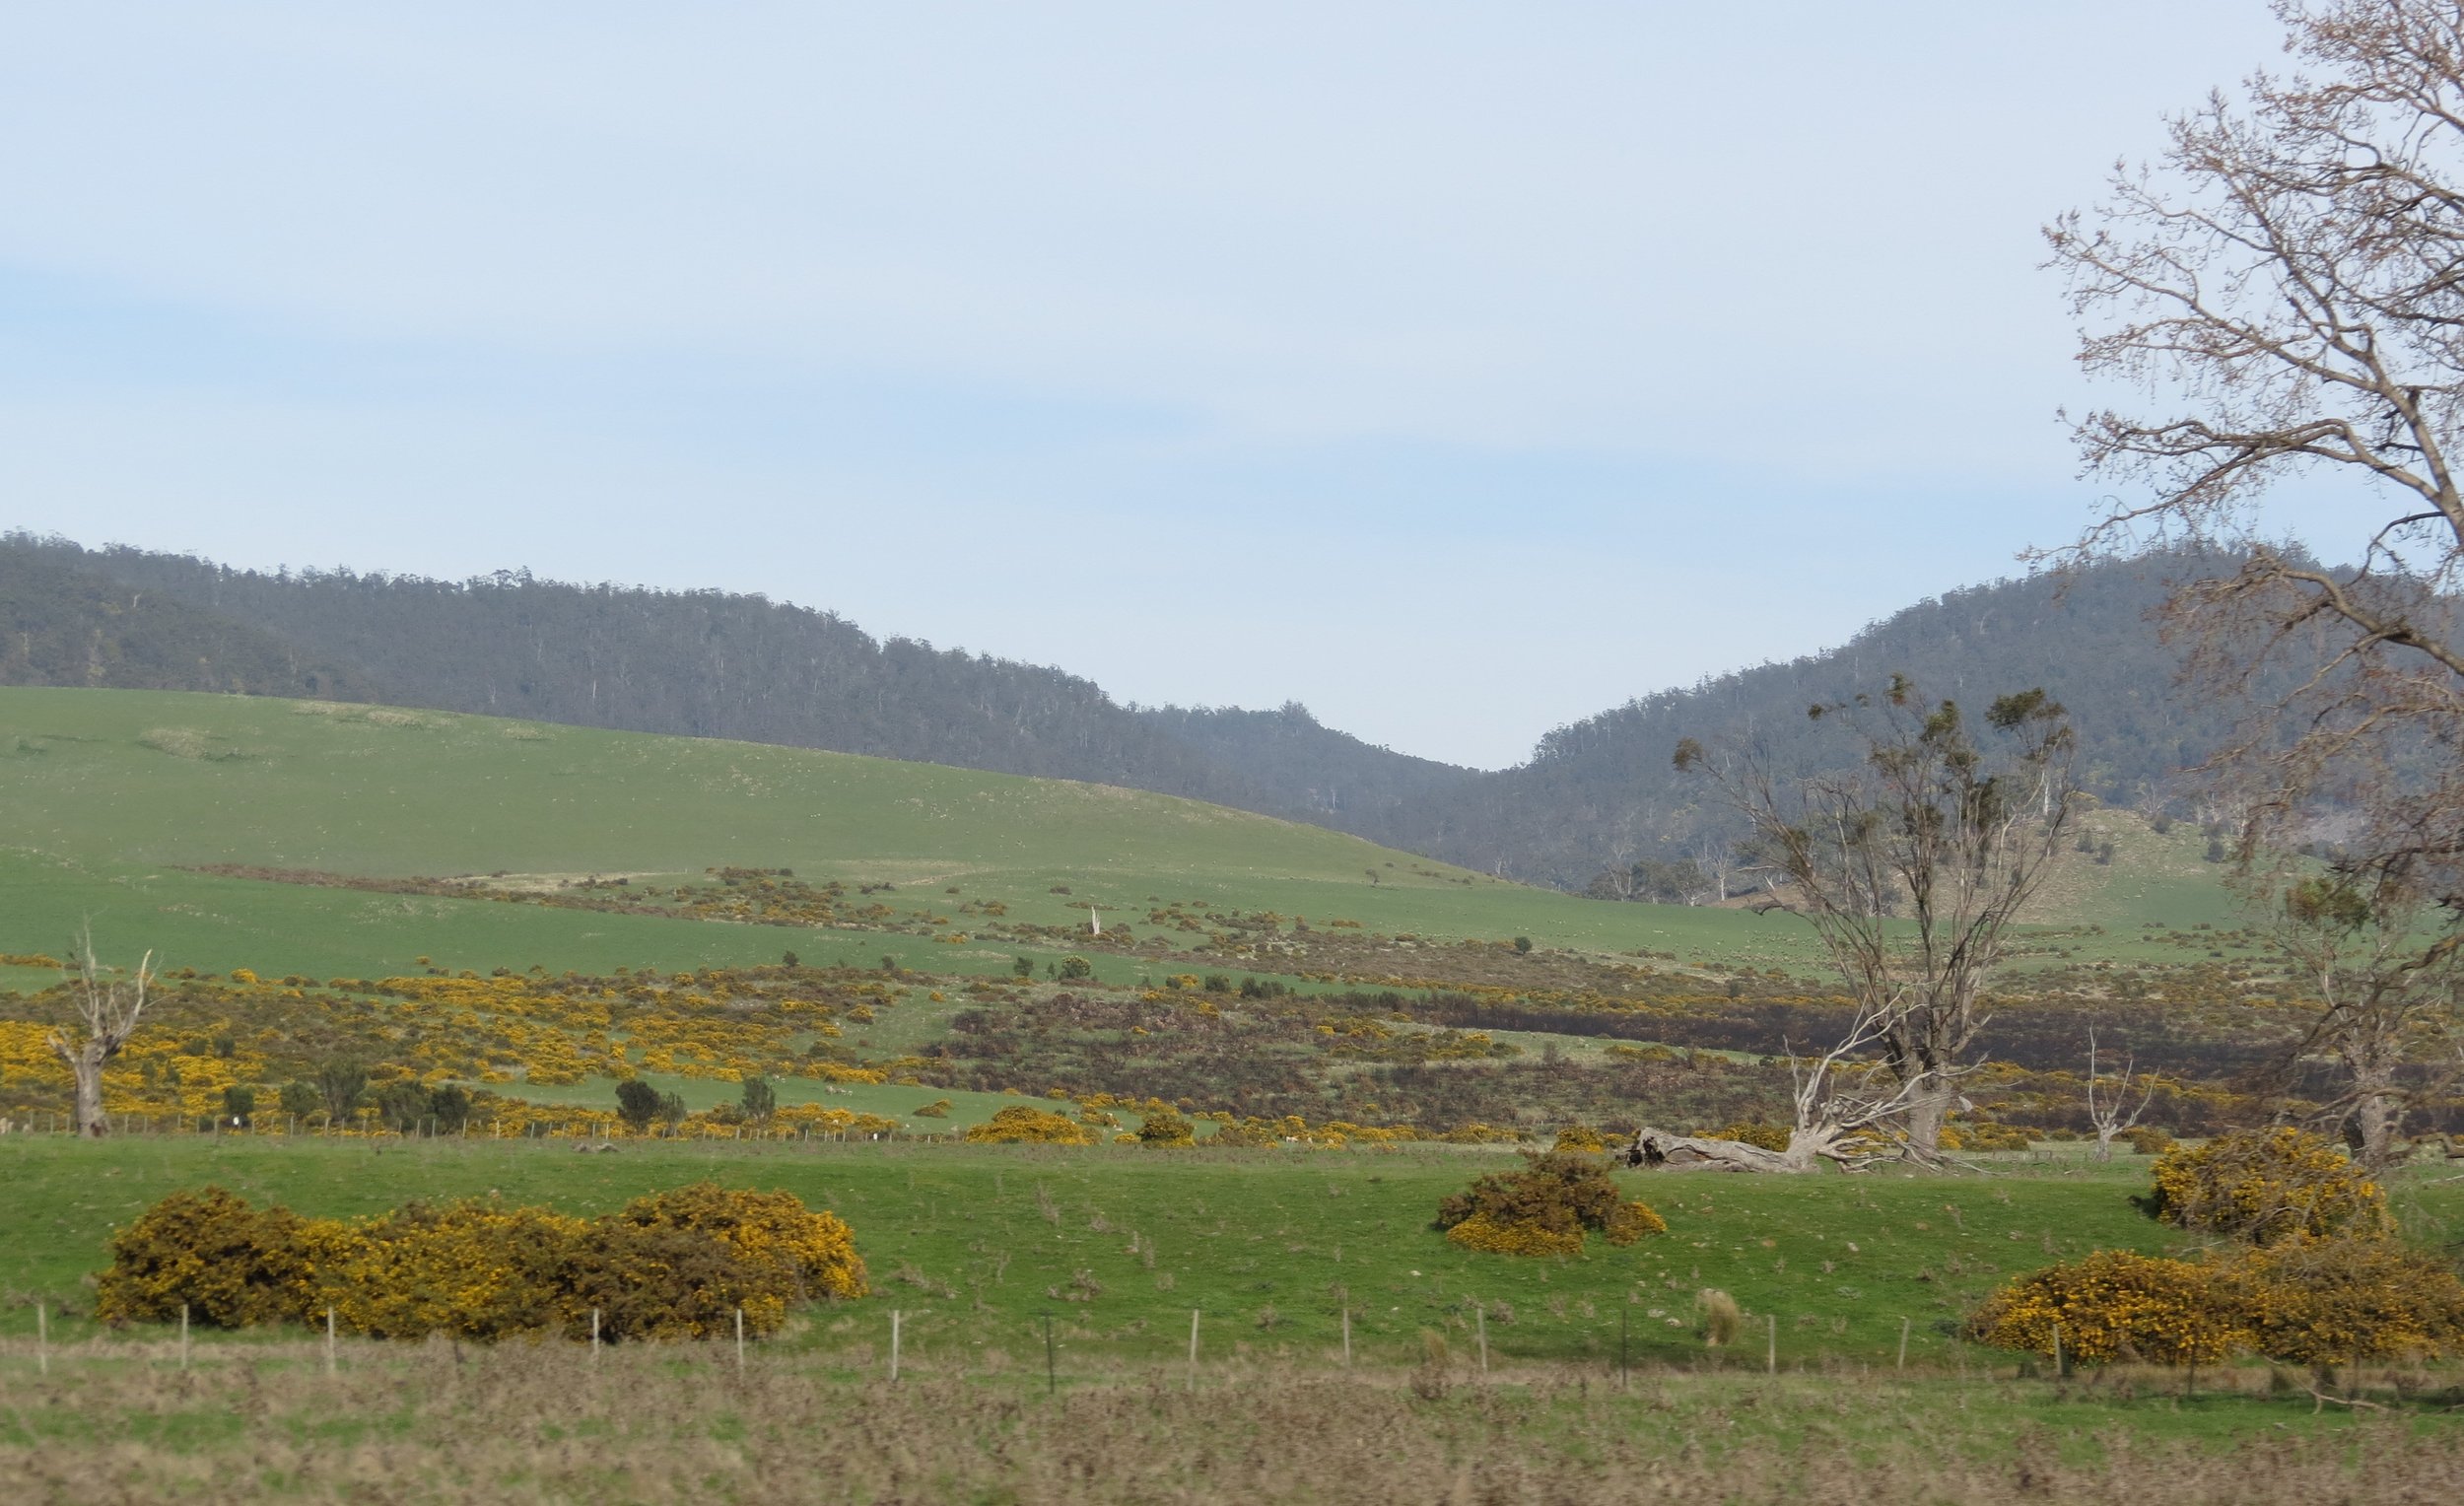 Tasmania's countryside is much like my native New England